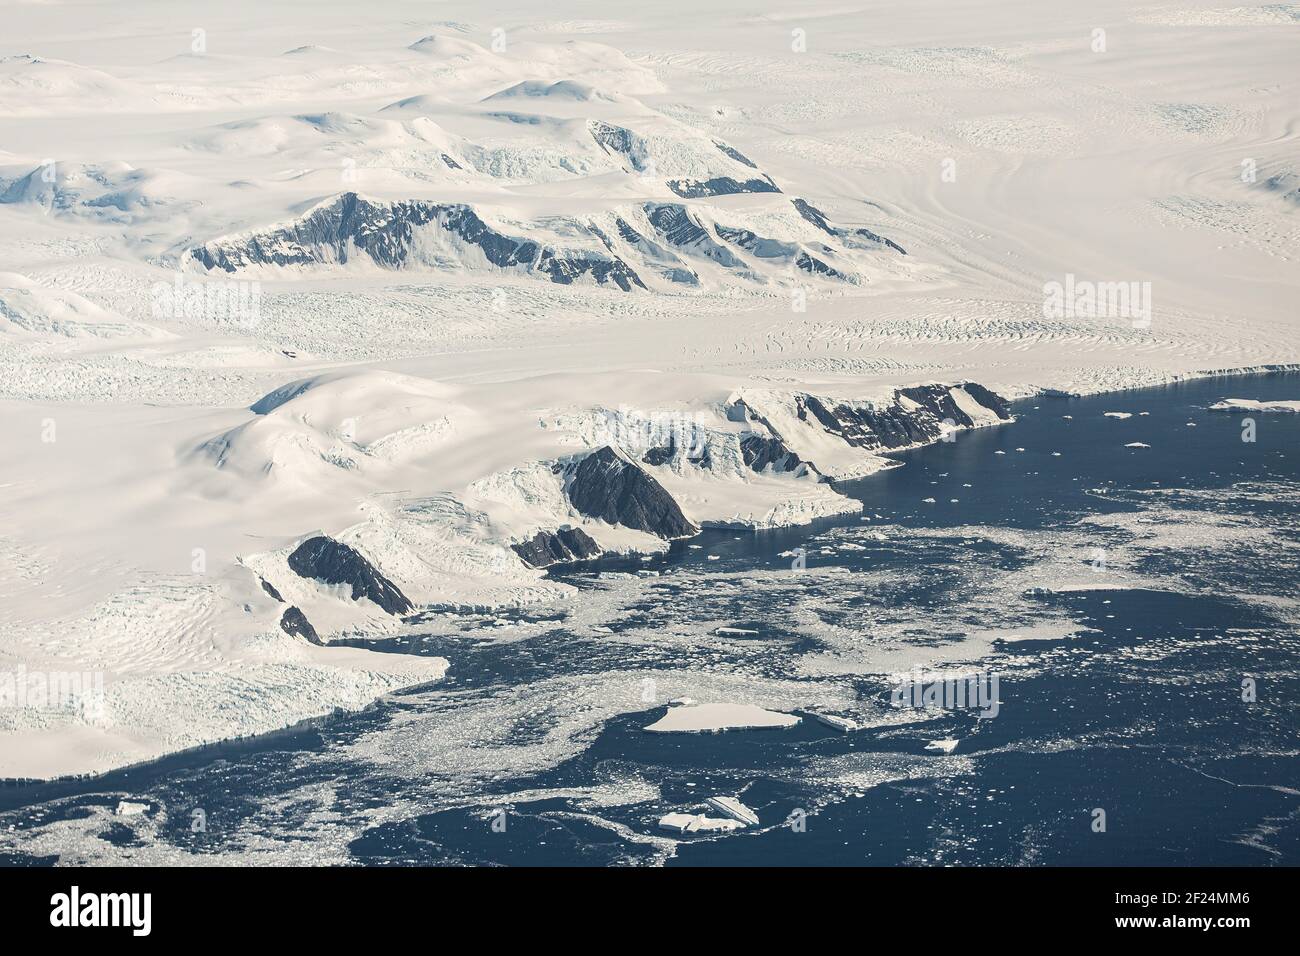 An aerial view of the snowy ice-covered landmass in Antarctica Stock Photo